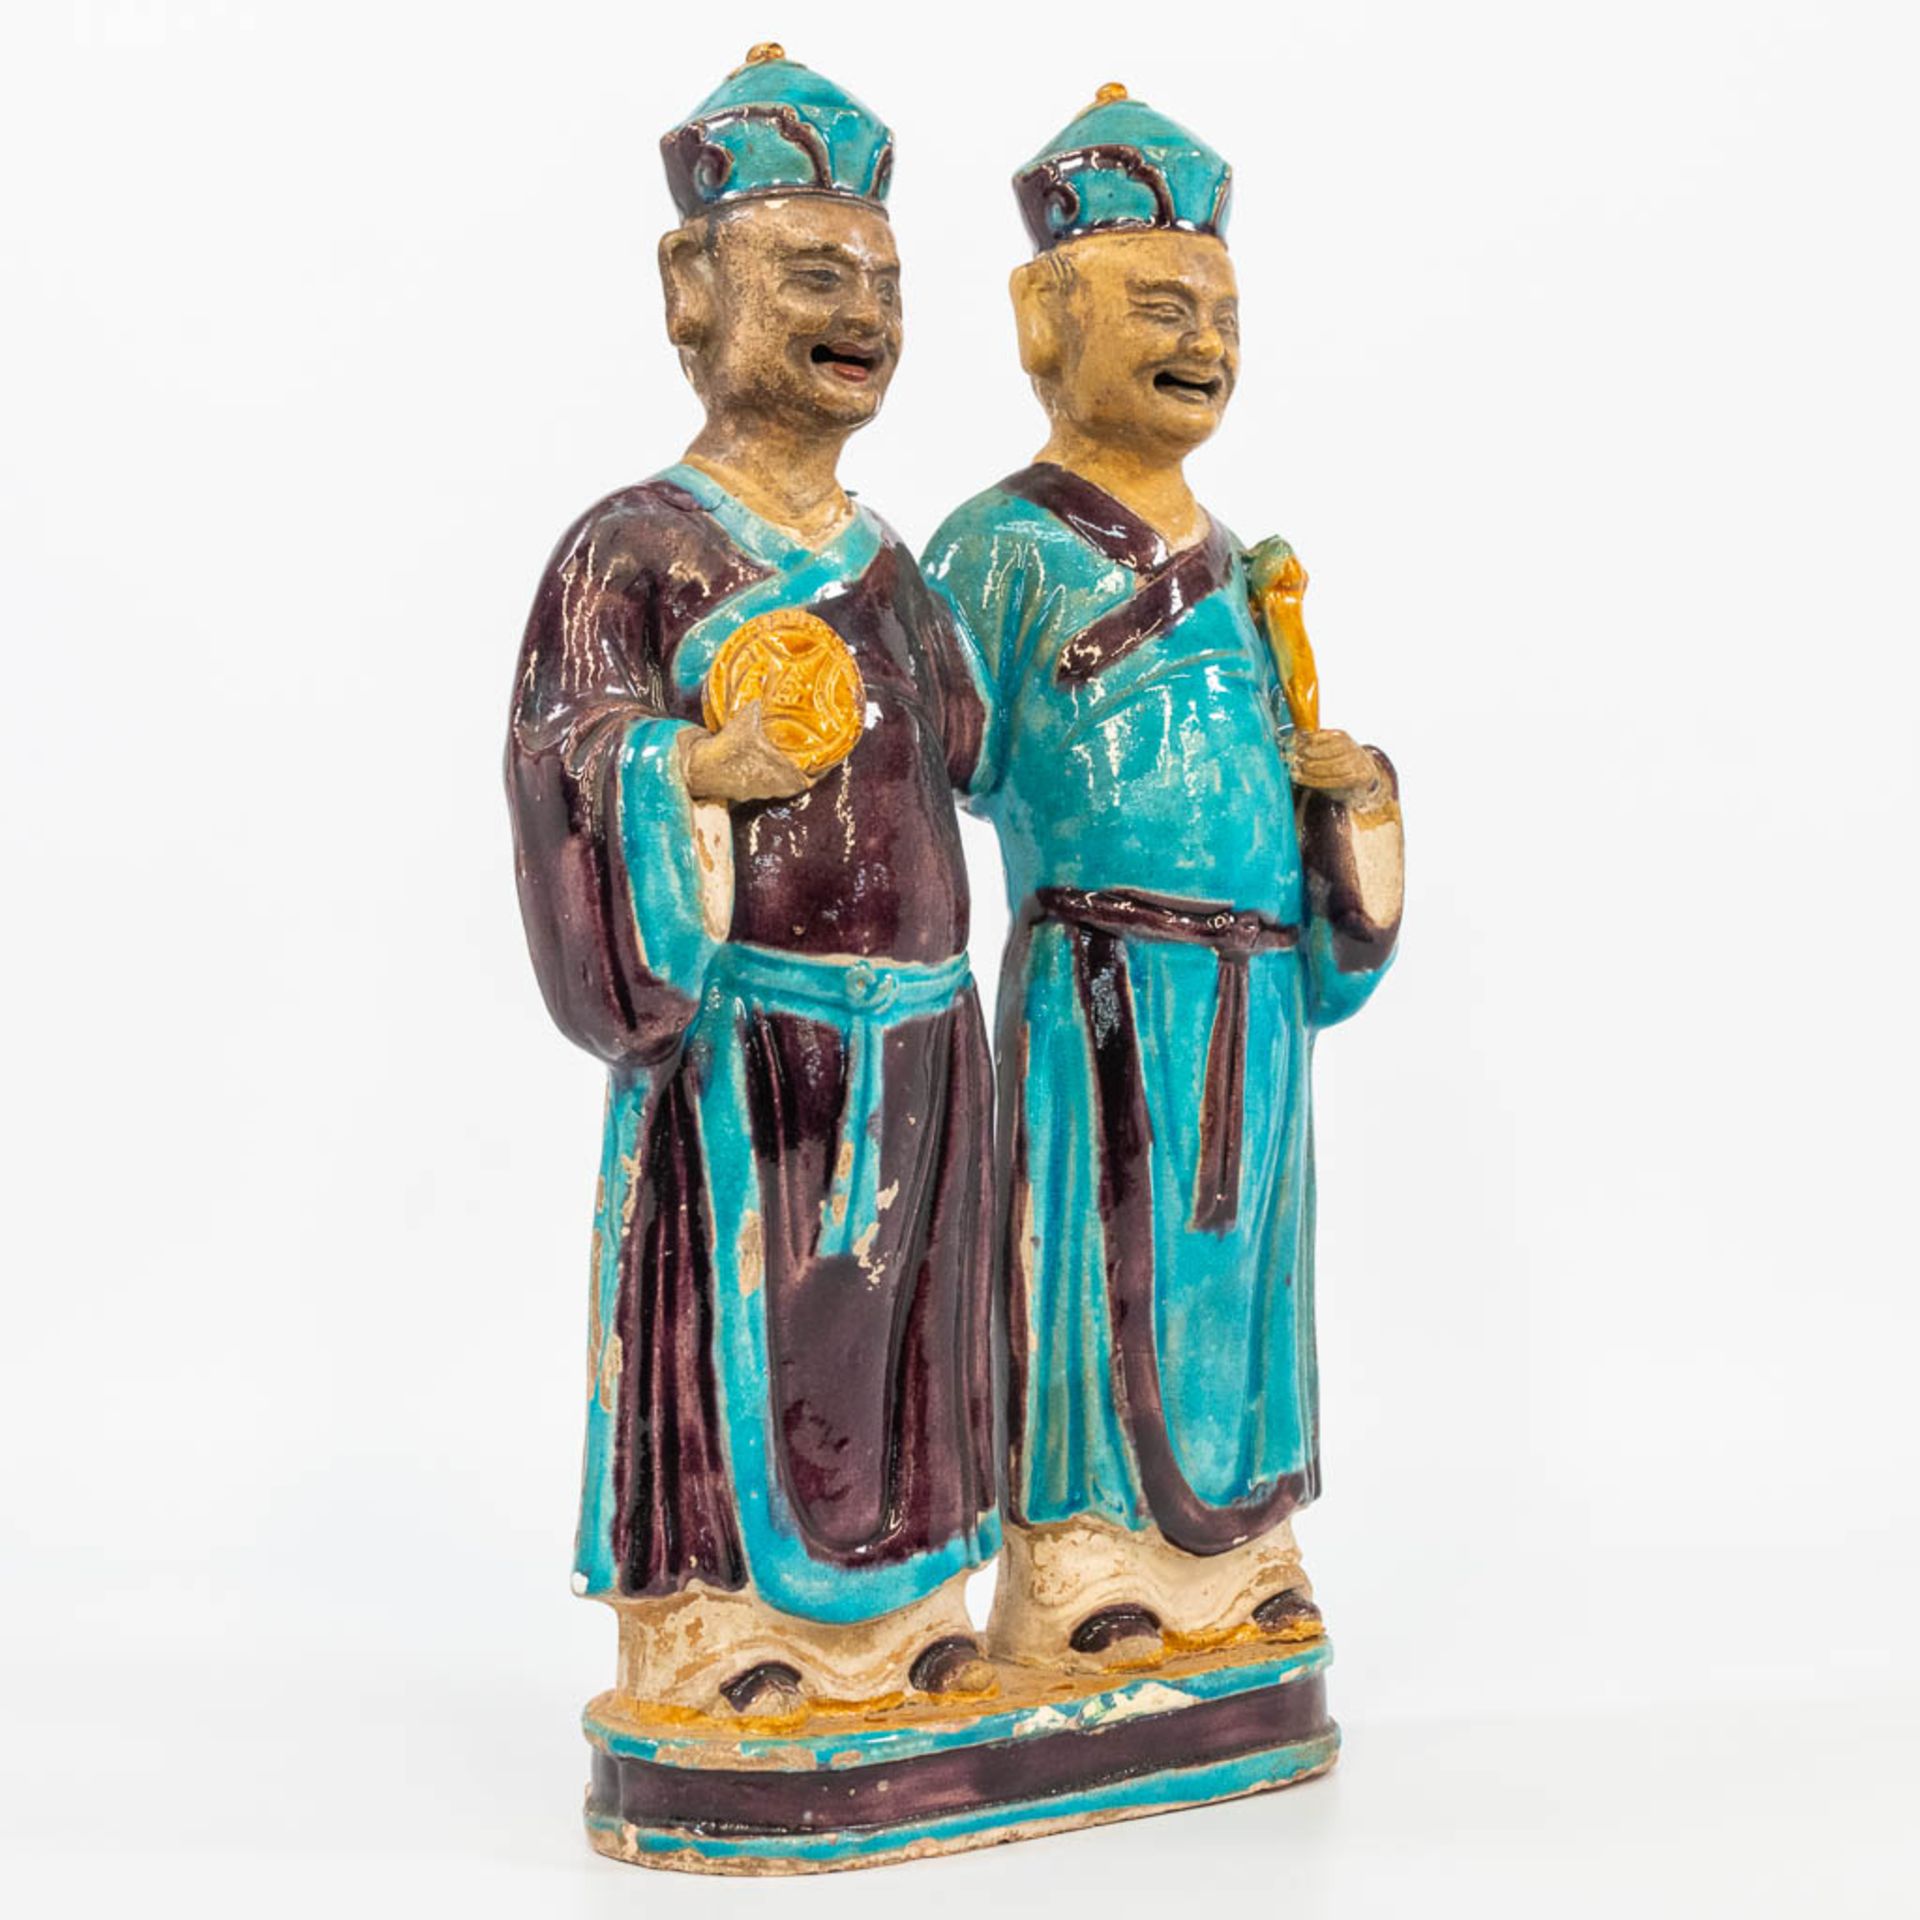 A statue made of glazed earthenware, a pair of Easern figurines. (8,5 x 24 x 41 cm) - Bild 8 aus 16